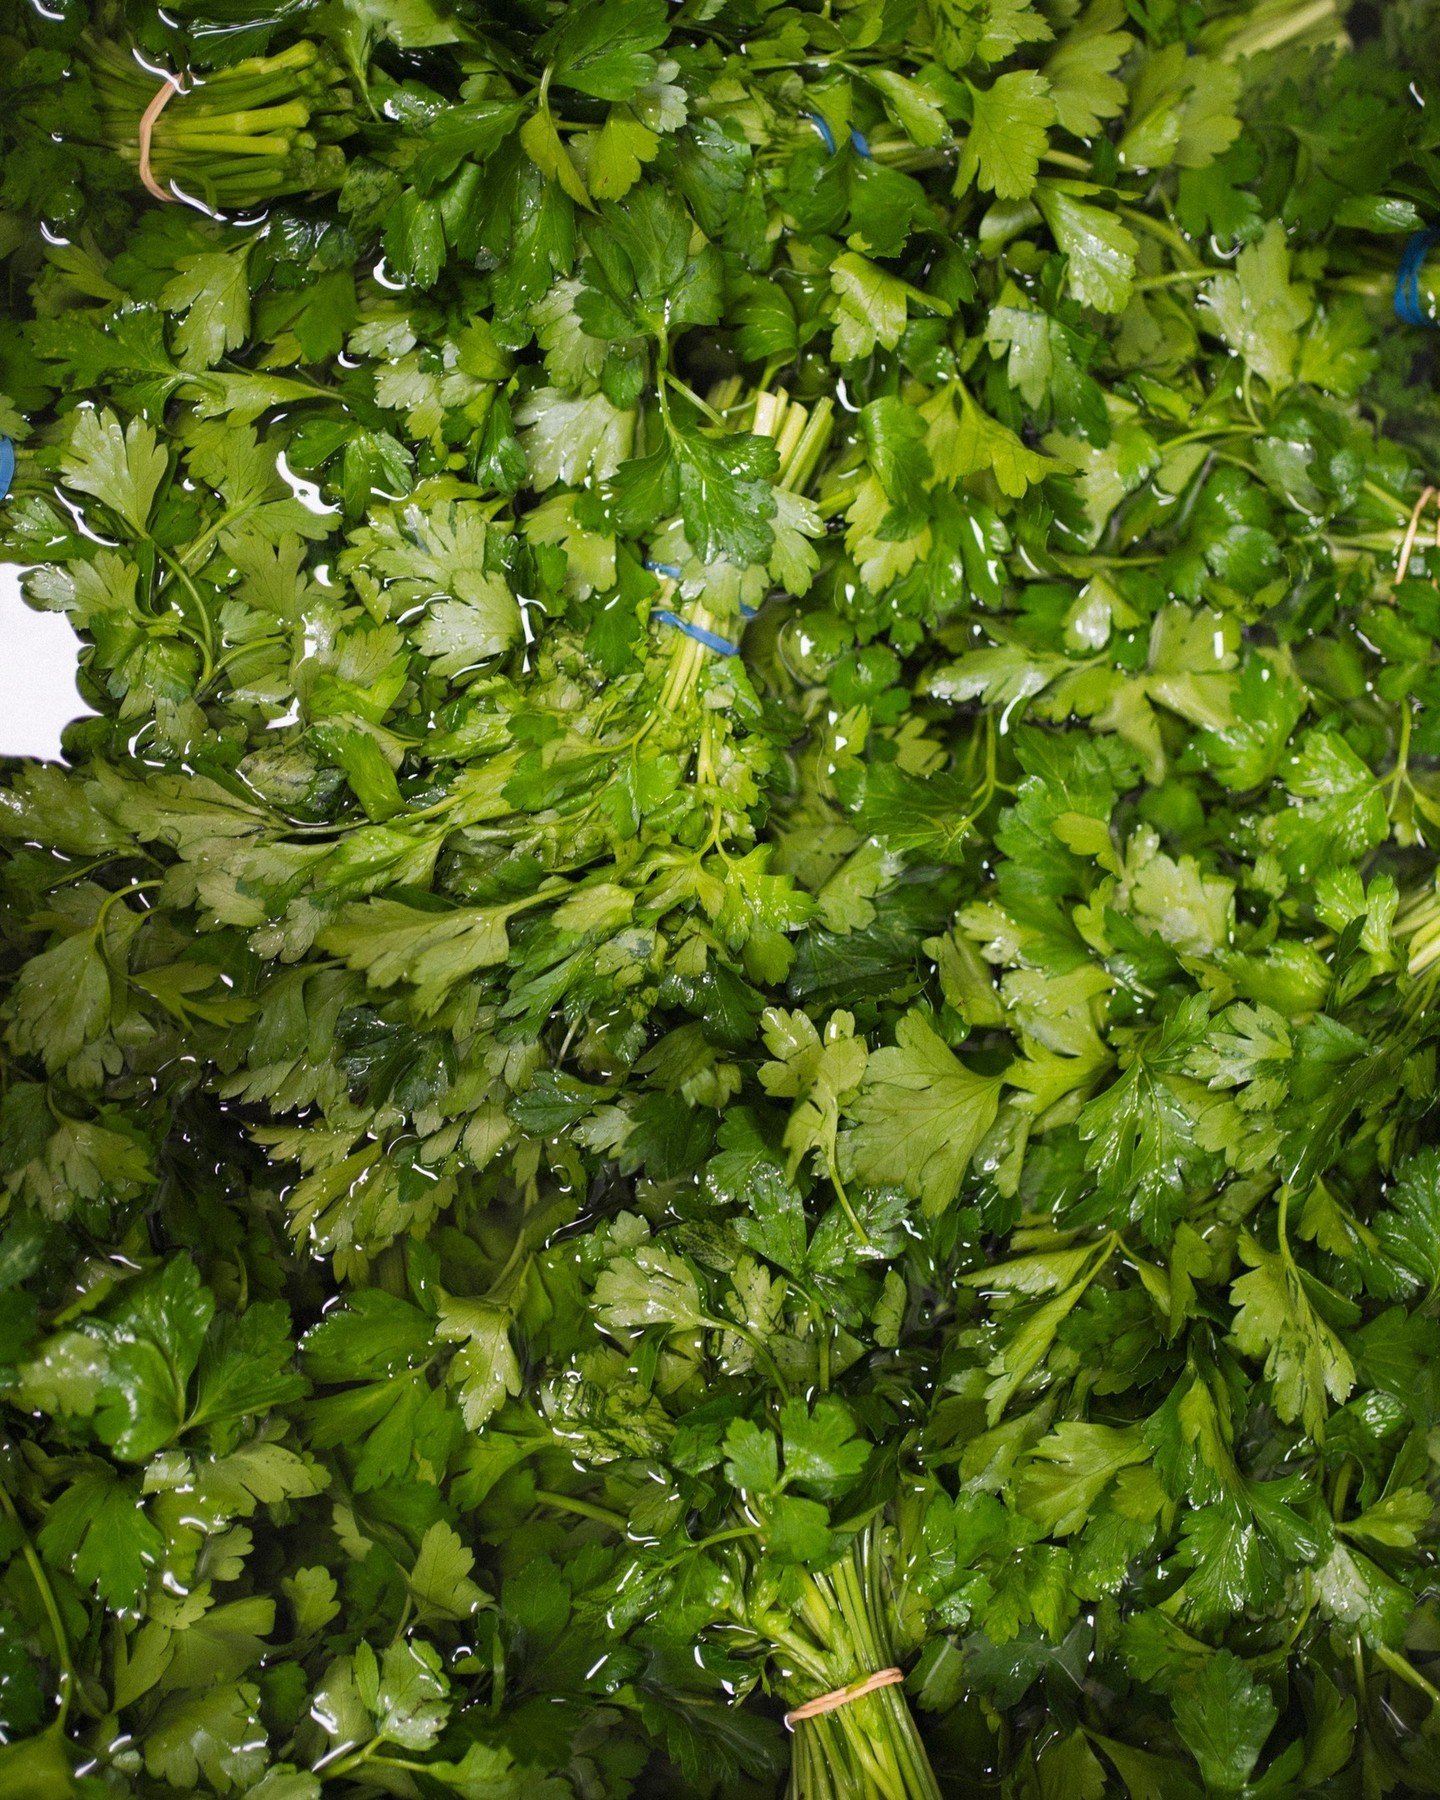 Lebanese cooking is all about the fresh herbs! Did you know we pride ourselves in making everything in-house?